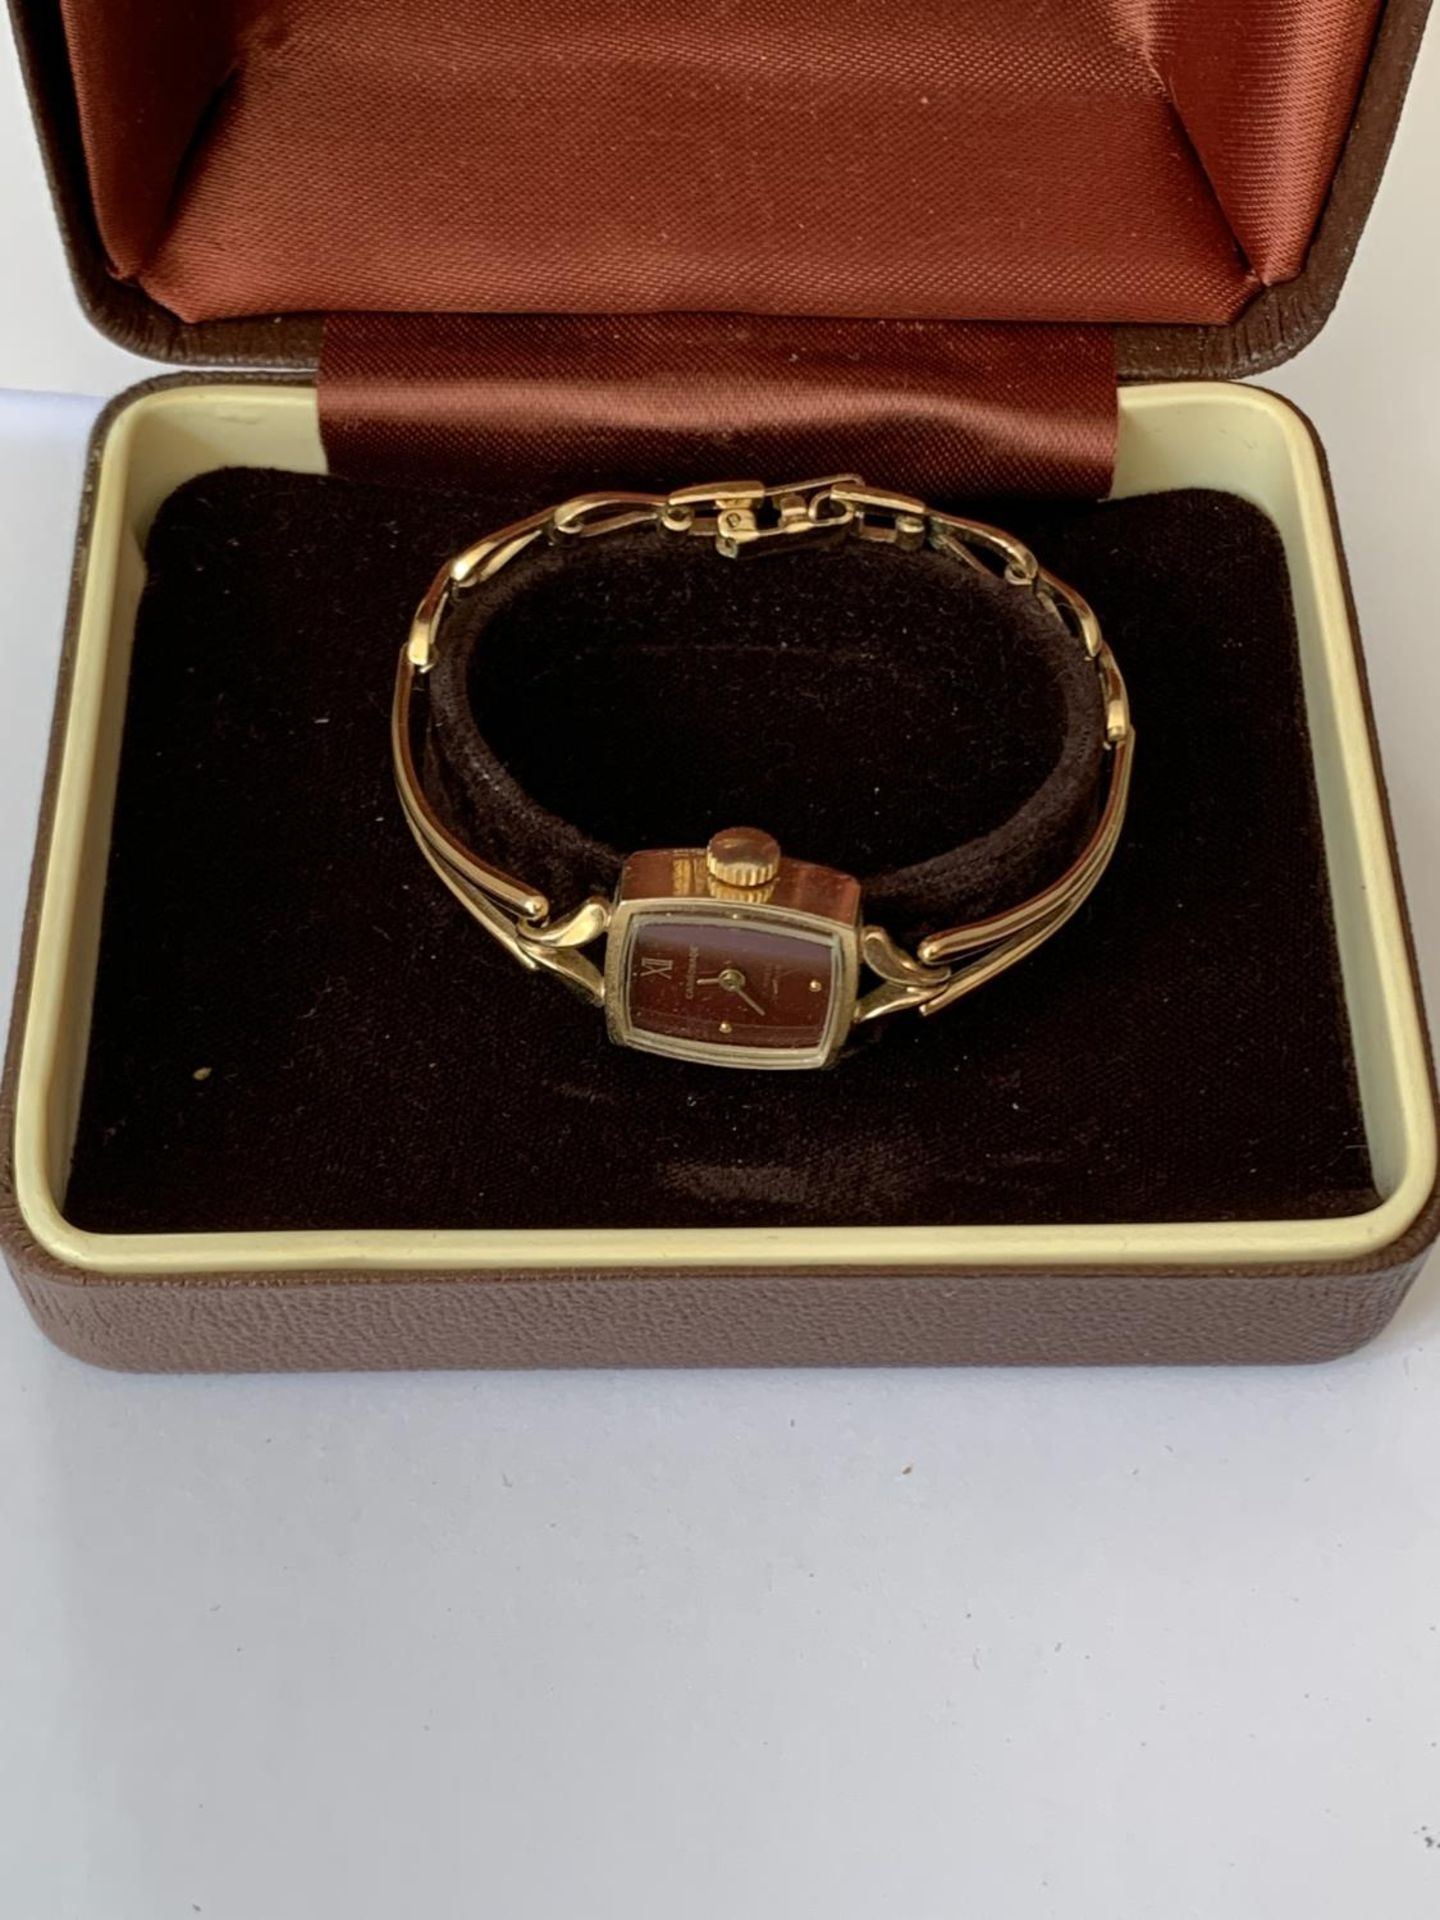 A LADIES CARRONADE WRISTWATCH IN A PRESENTATION BOX SEEN WORKING BUT NO WARRANTY - Image 3 of 4